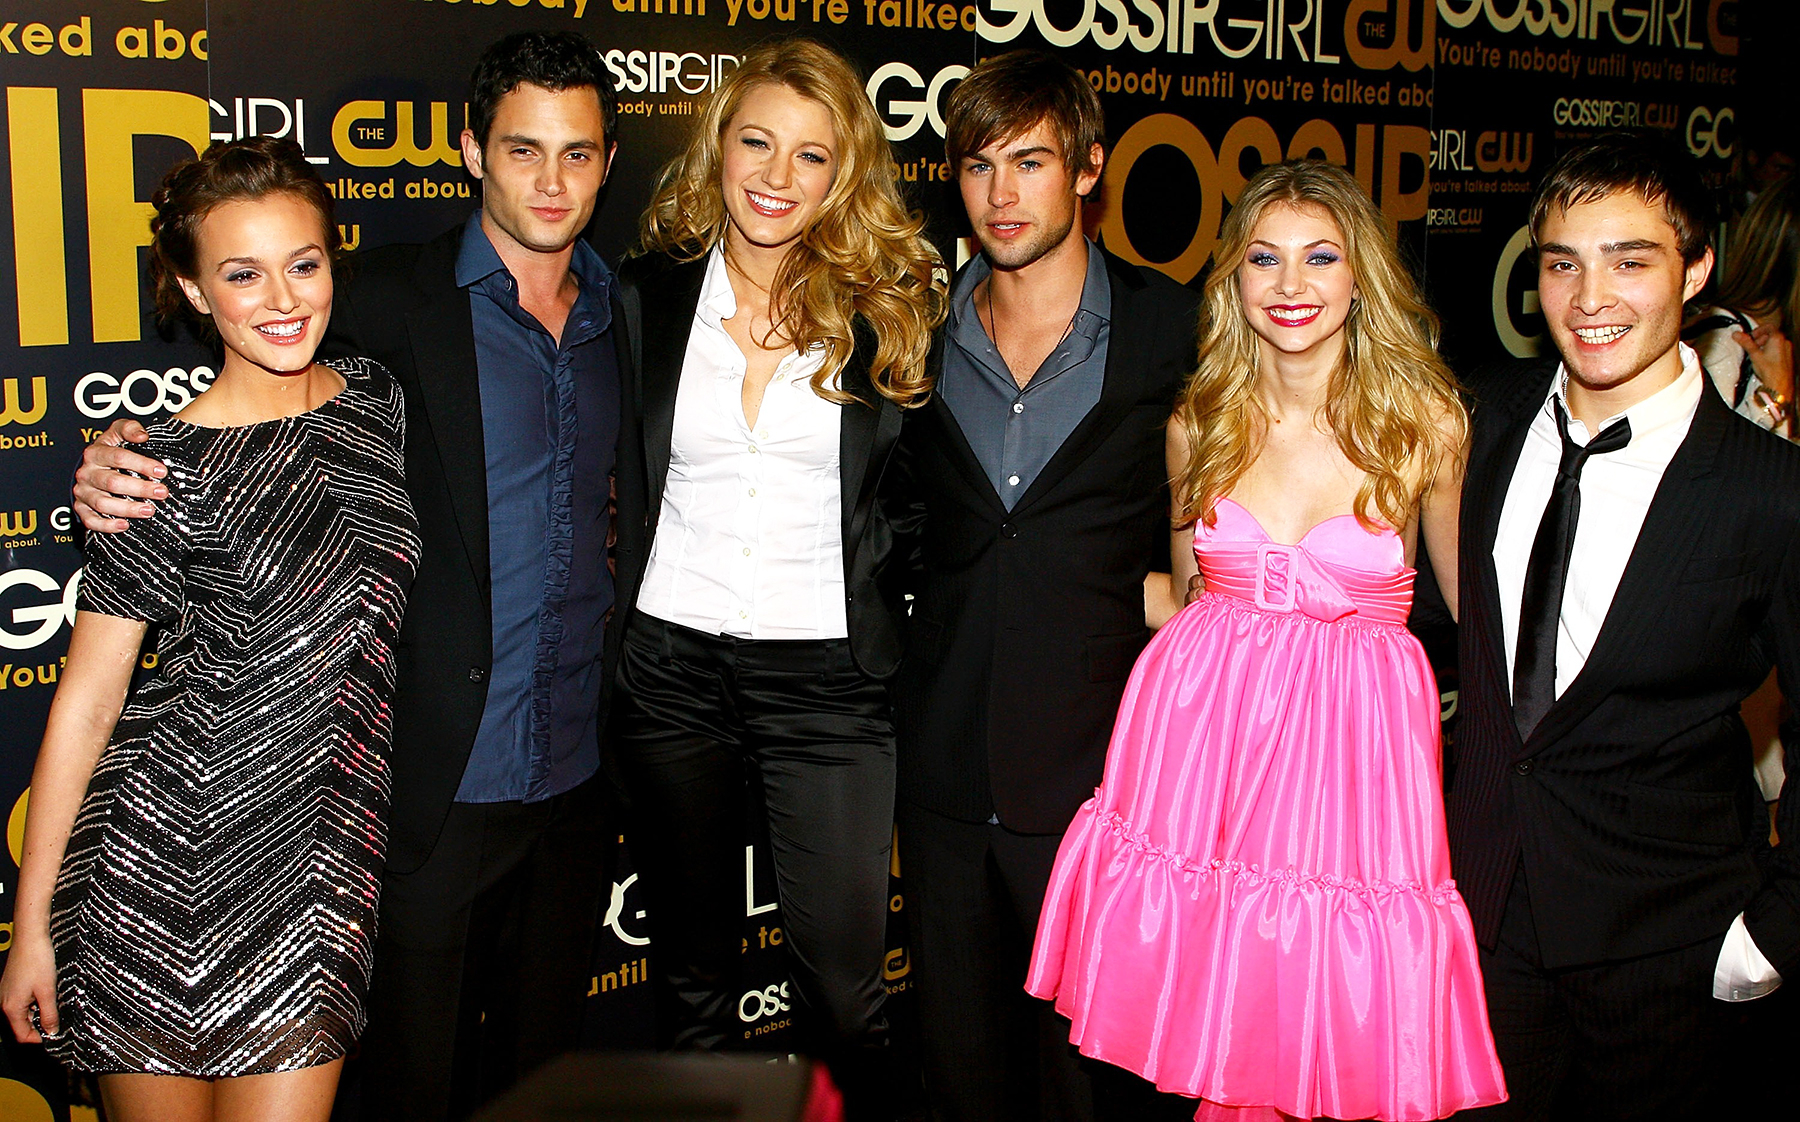 Gossip Girl Cast Where Are They Now?